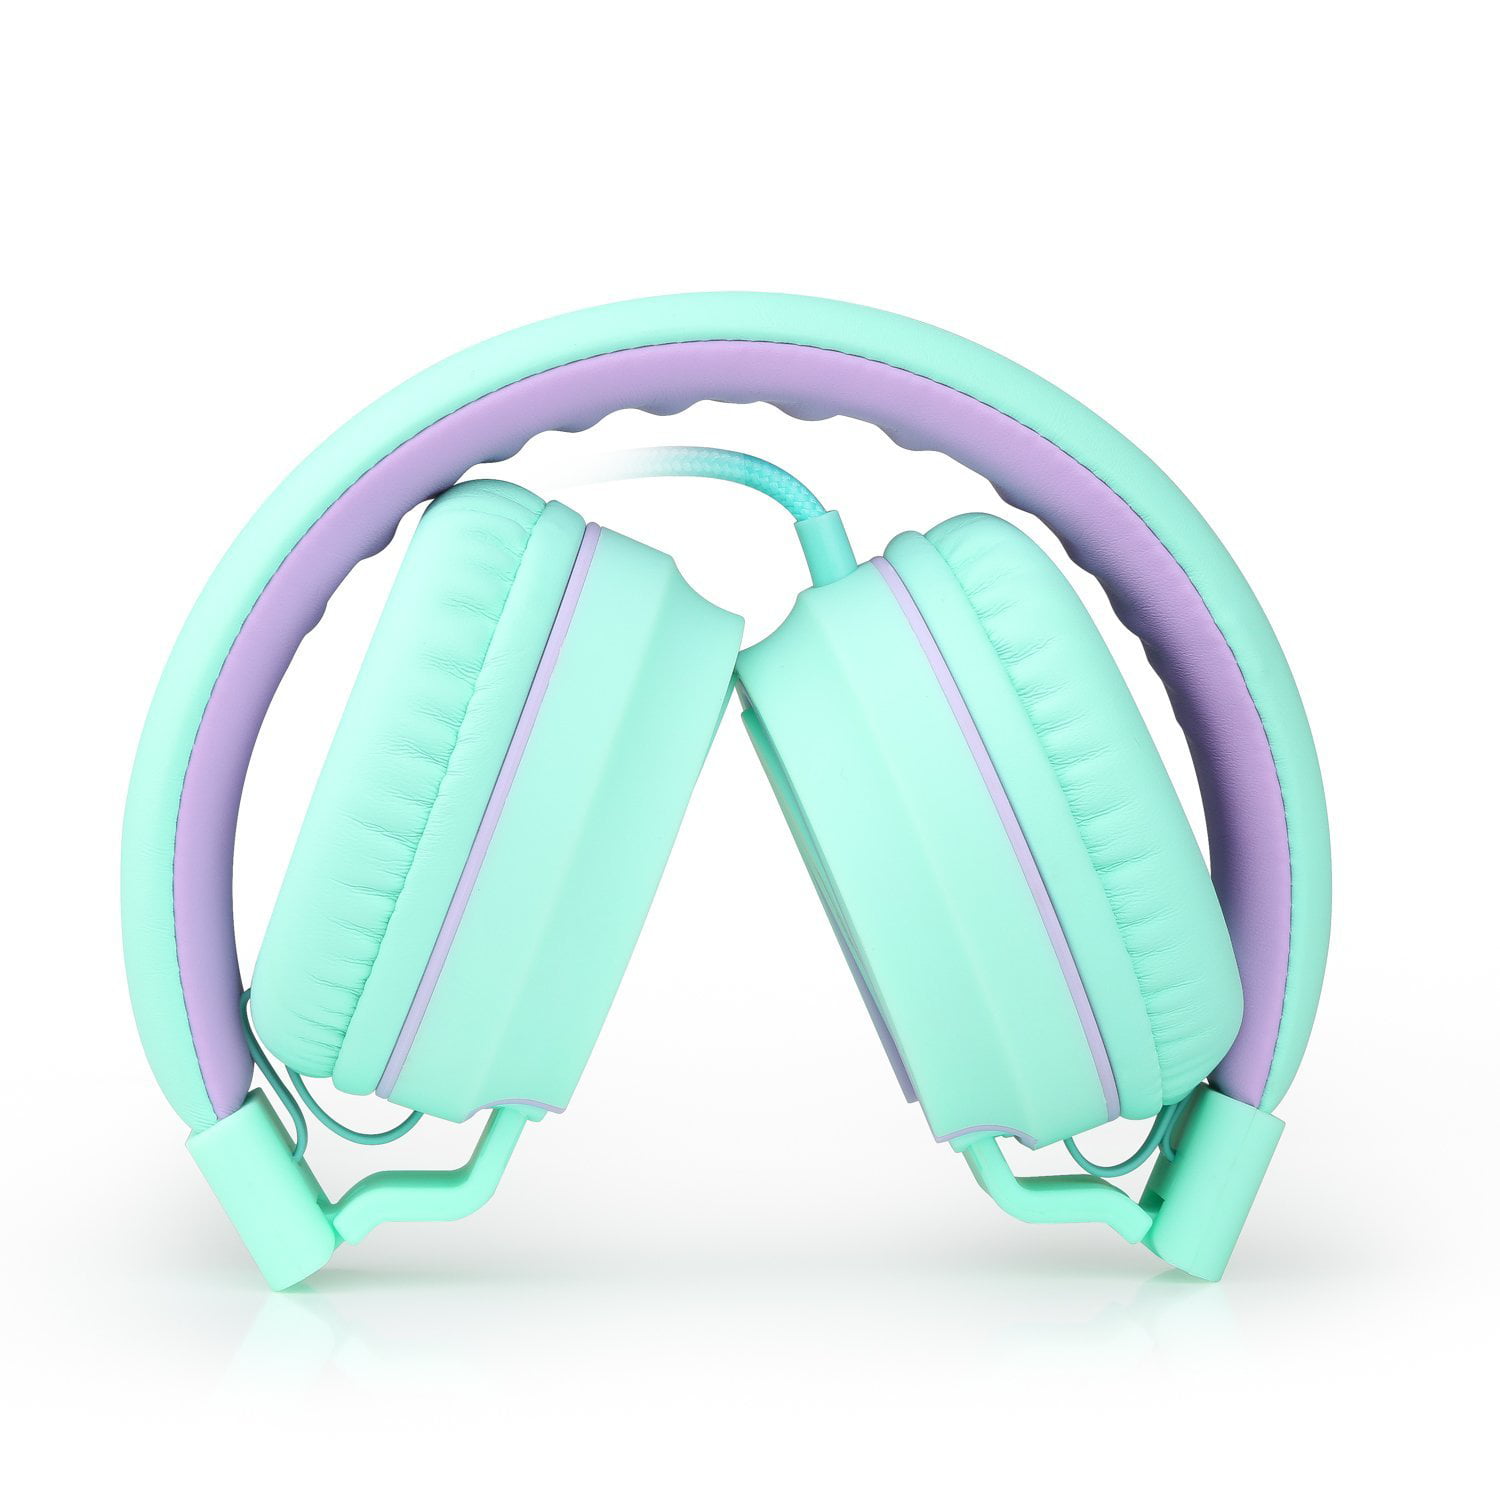 AILIHEN I35 Kid Headphones with Microphone Volume Limited Childrens Girls Boys Teens Lightweight Foldable Portable Wired Headsets for School Airplane Travel Cellphones Tablets Blue Green